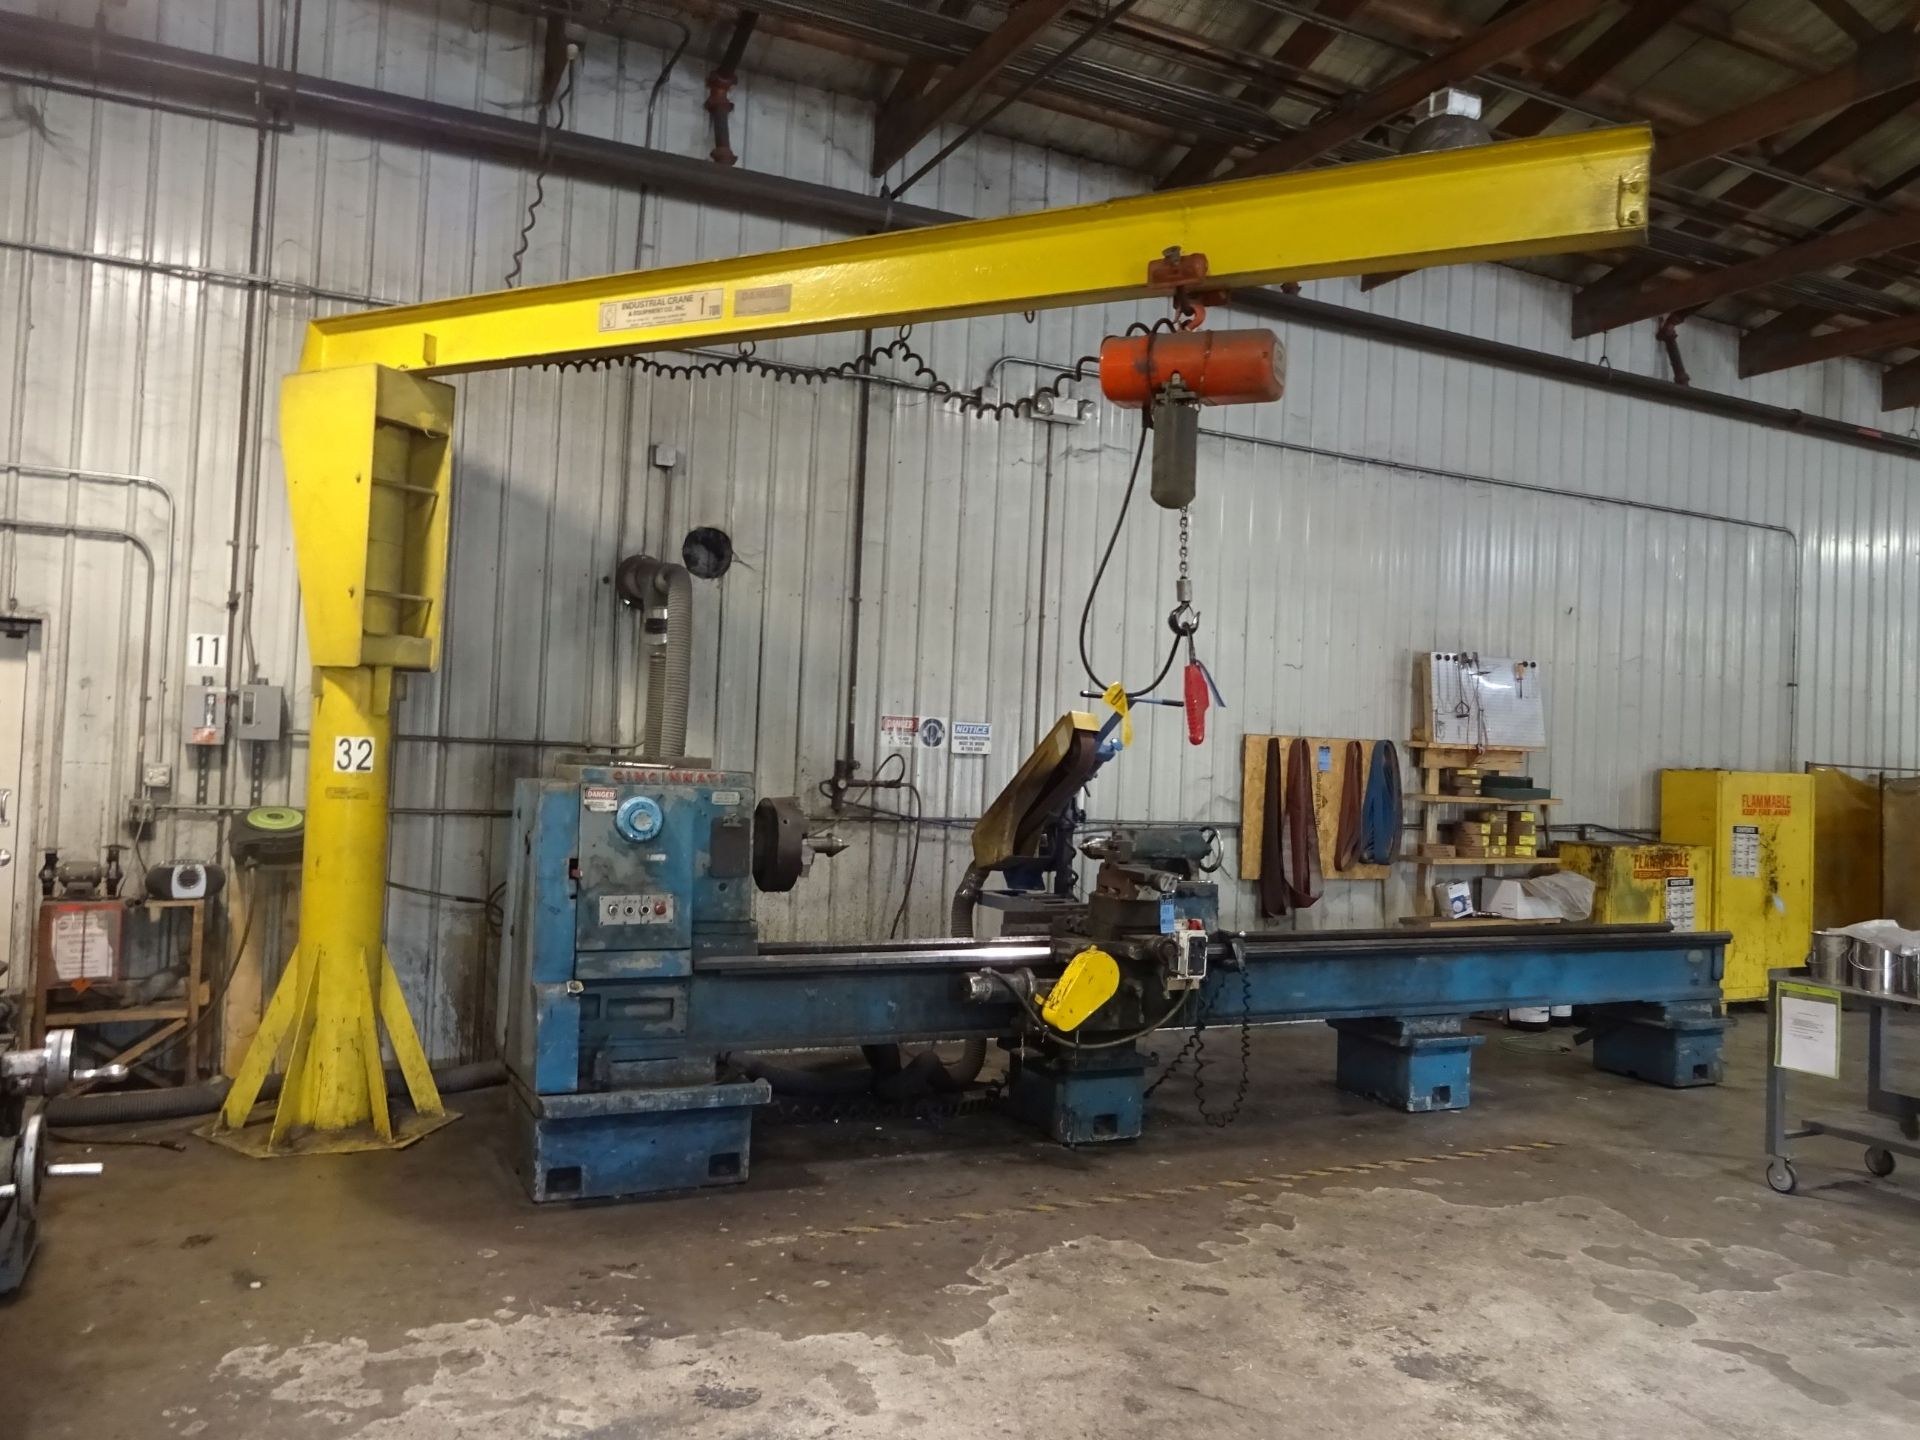 1 TON X 15' ARM X 10' UNDER (APROX.) FREE STANDING JIB CRANE AND 1 TON CM HOIST - LOCATED IN